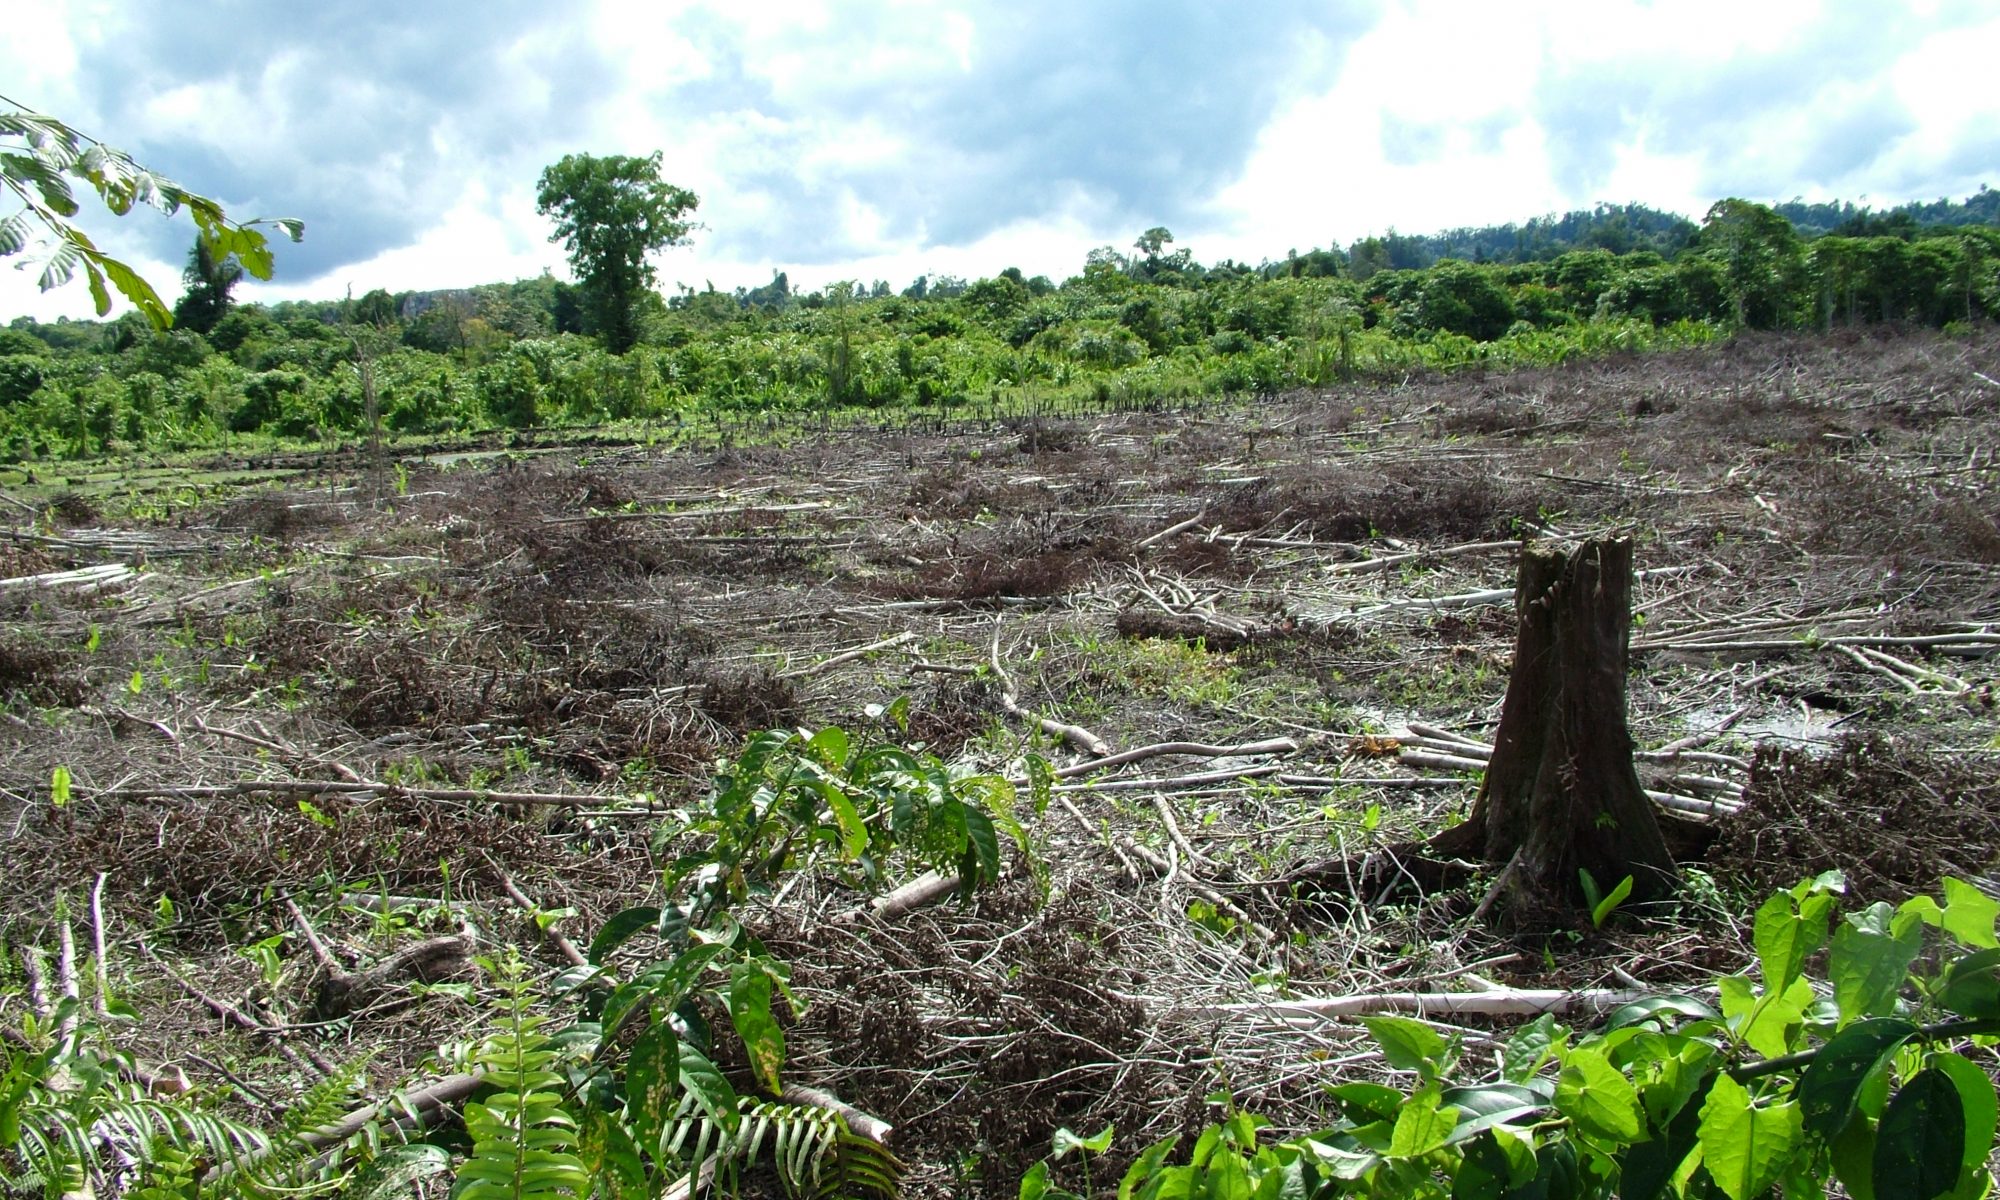 Deforested area of tropical forest